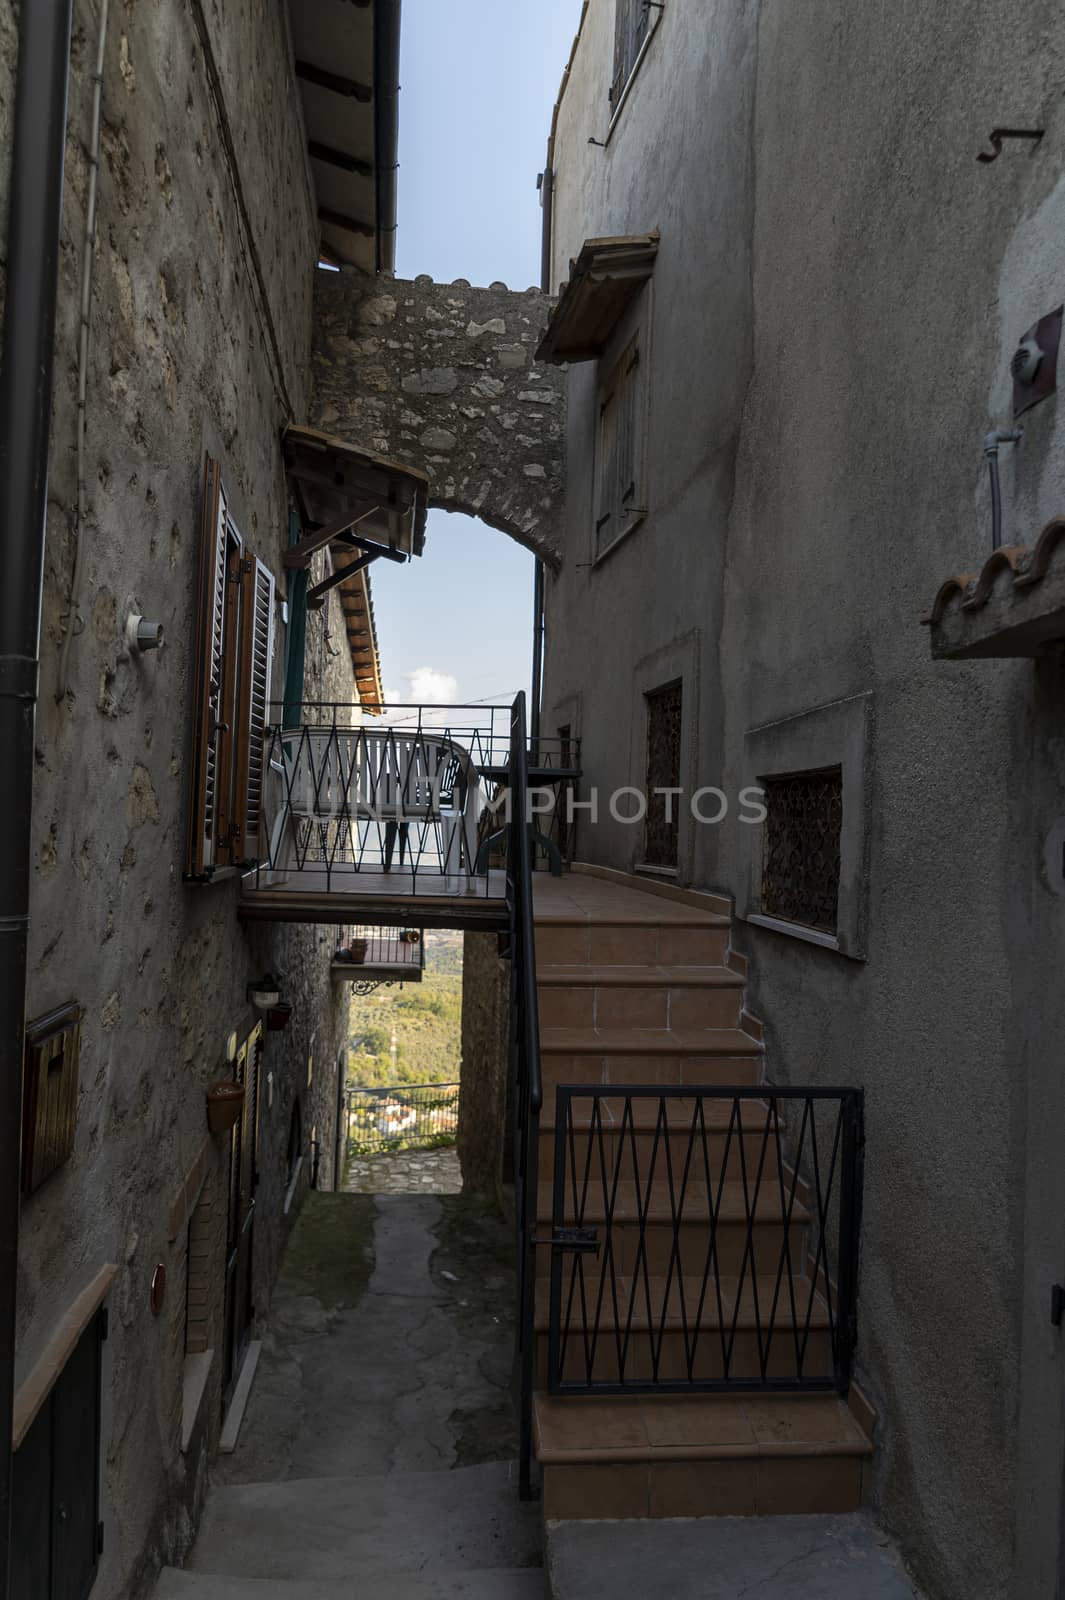 miranda,italy october 01 2020:architecture of alleys, squares and buildings in the town of Miranda in the province of Terni